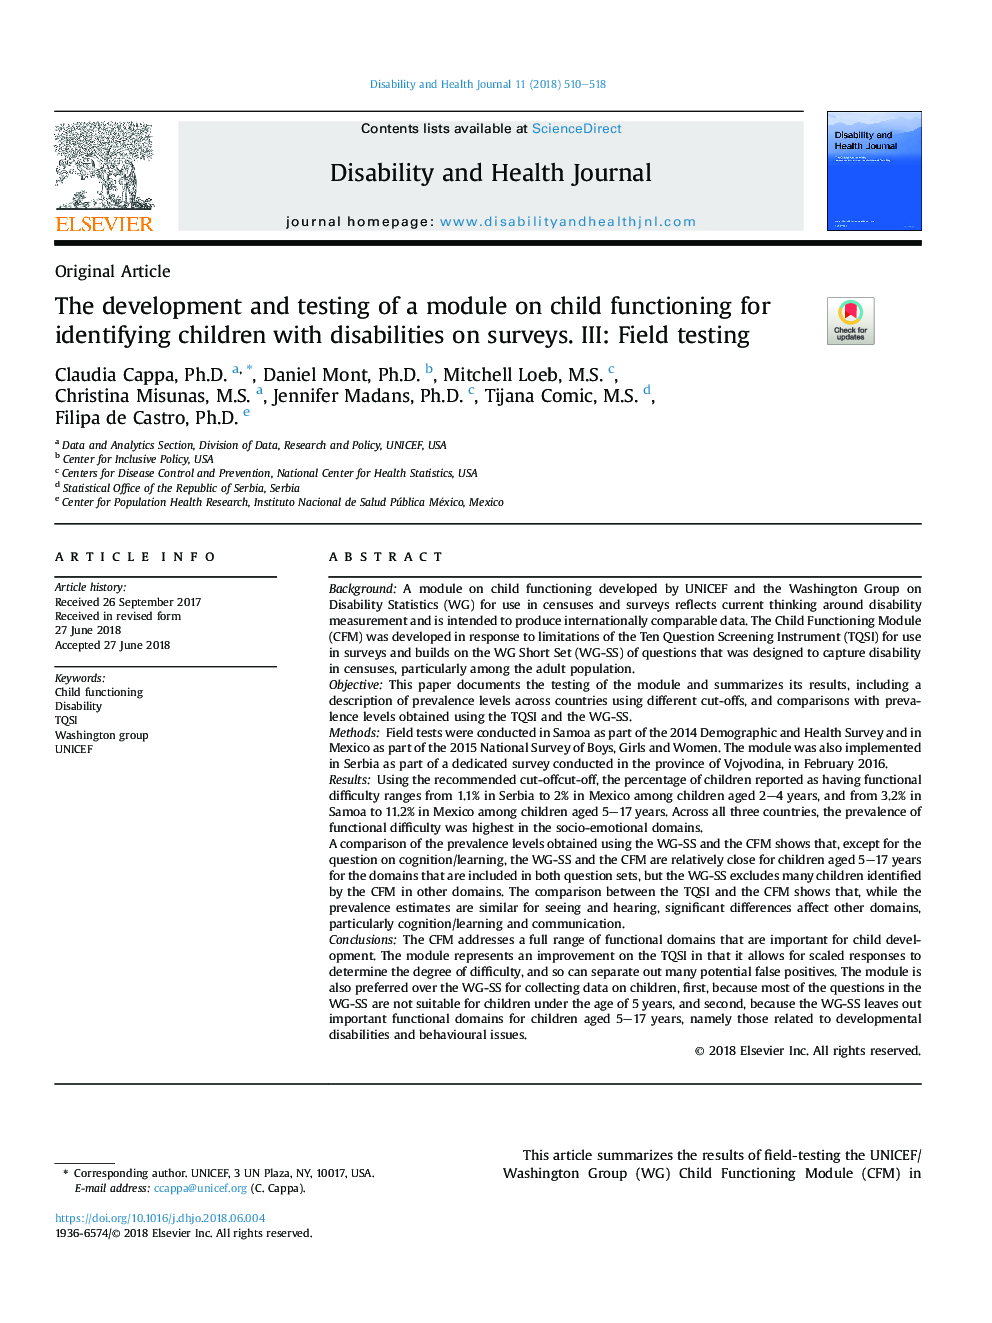 The development and testing of a module on child functioning for identifying children with disabilities on surveys. III: Field testing